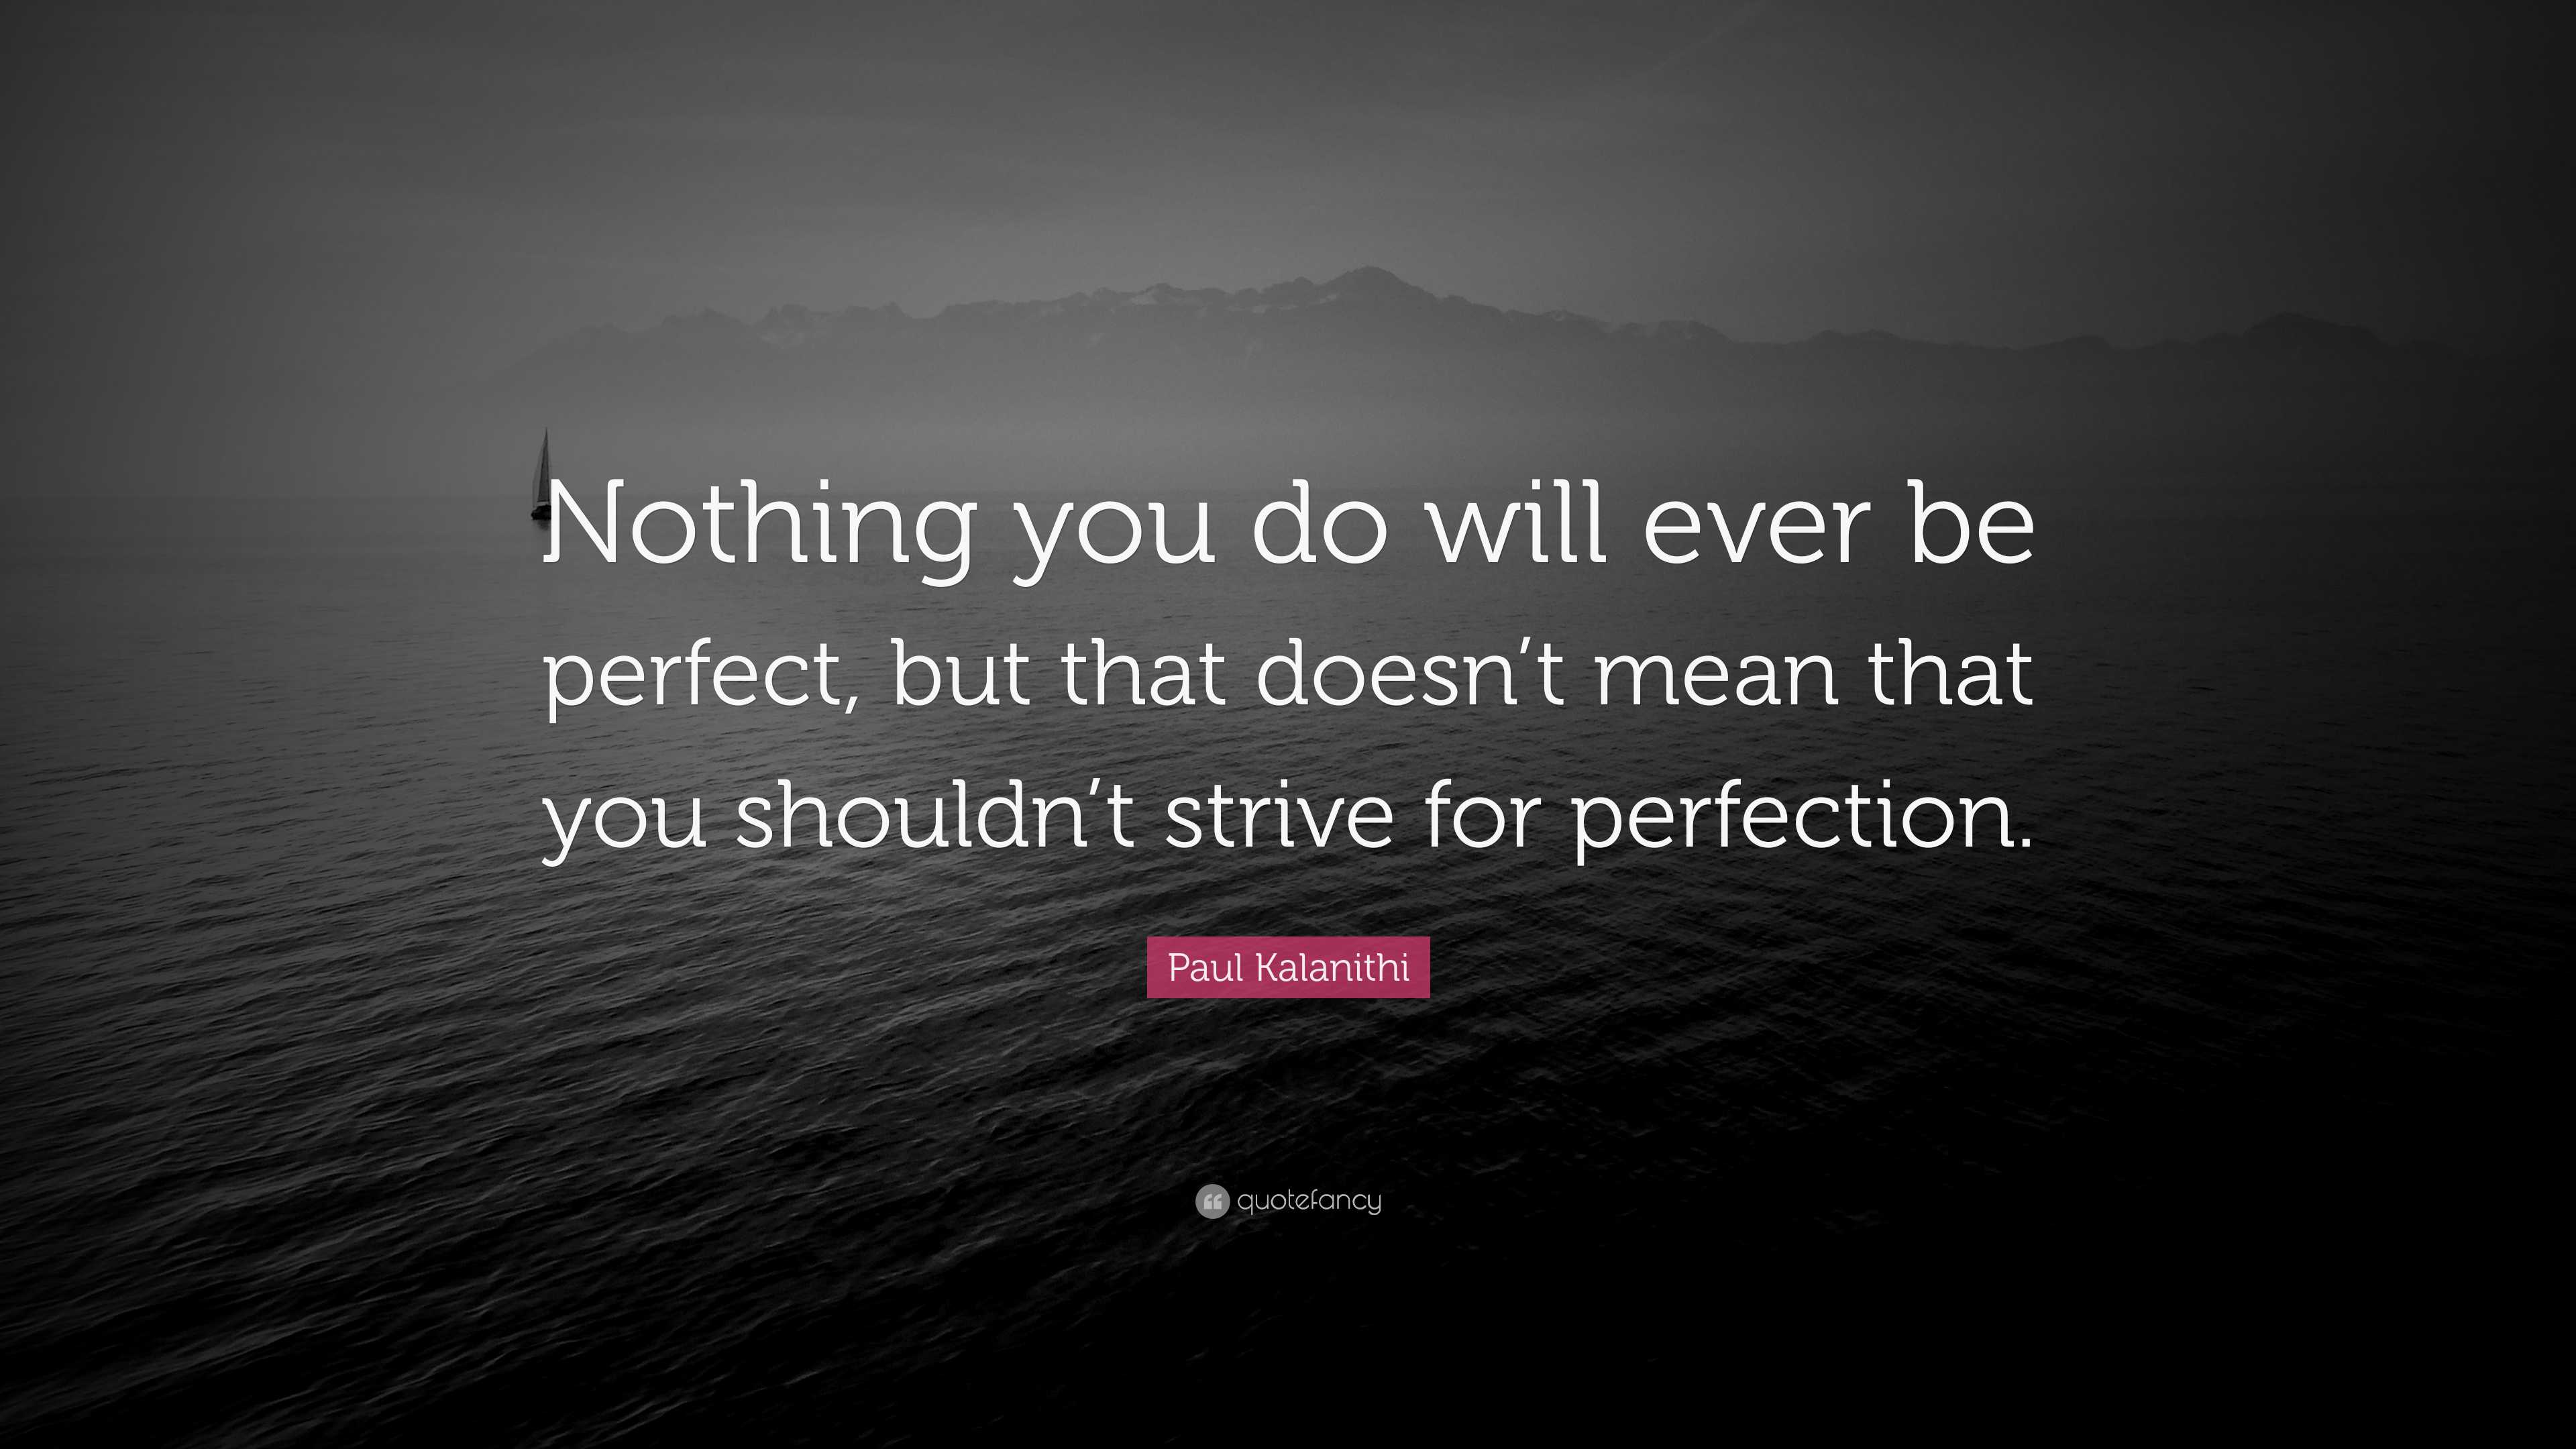 Why You Shouldn't Strive For Perfection